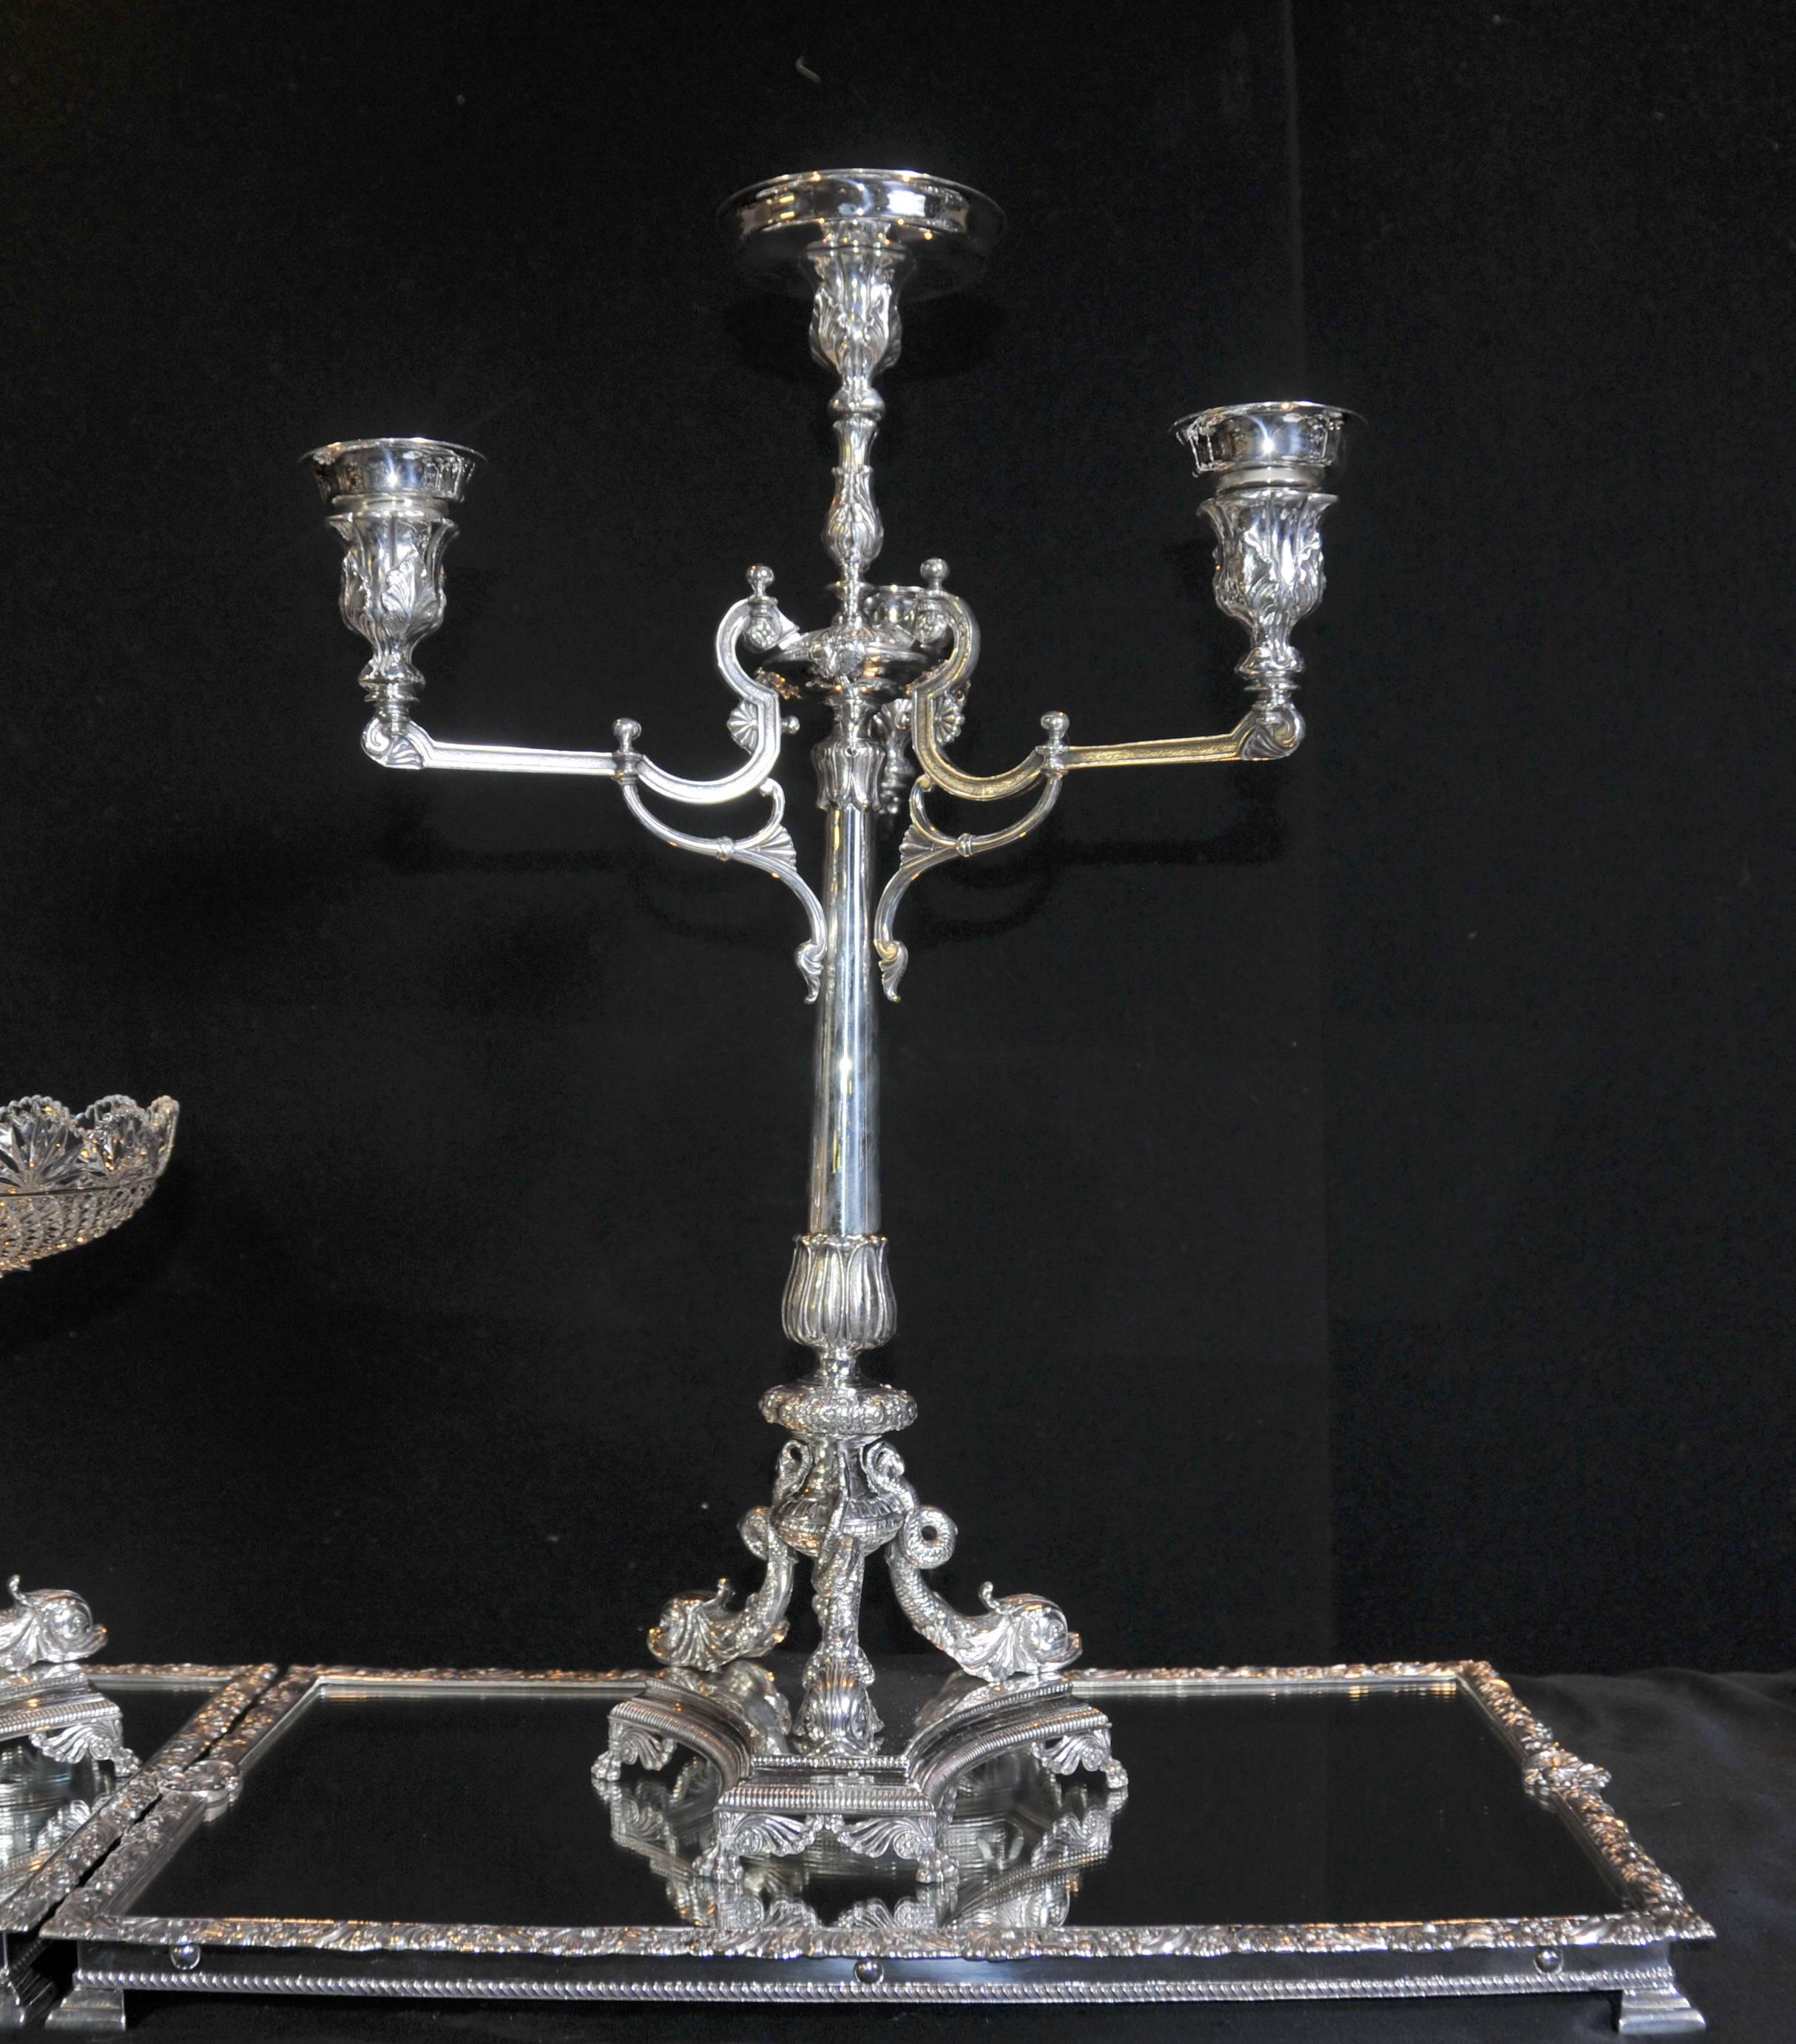 Elkington Sheffield Silver Plate Epergne Centerpiece Cherub Dish In Excellent Condition For Sale In Potters Bar, Herts